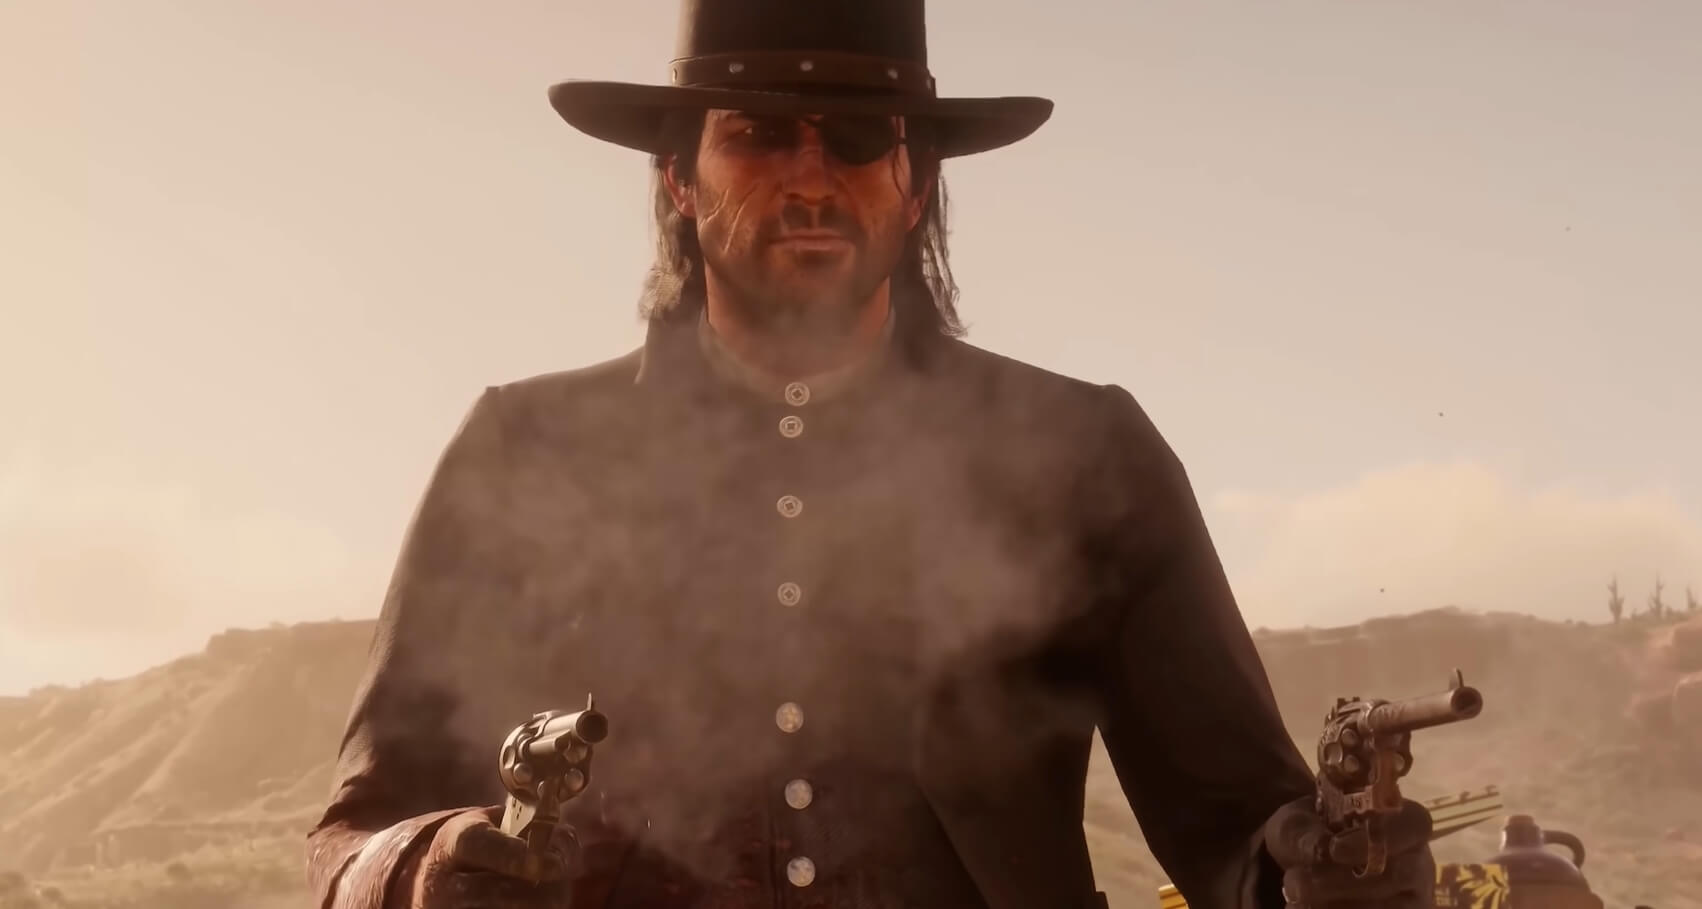 Red Dead Redemption has received an Unreal Engine 5 remake